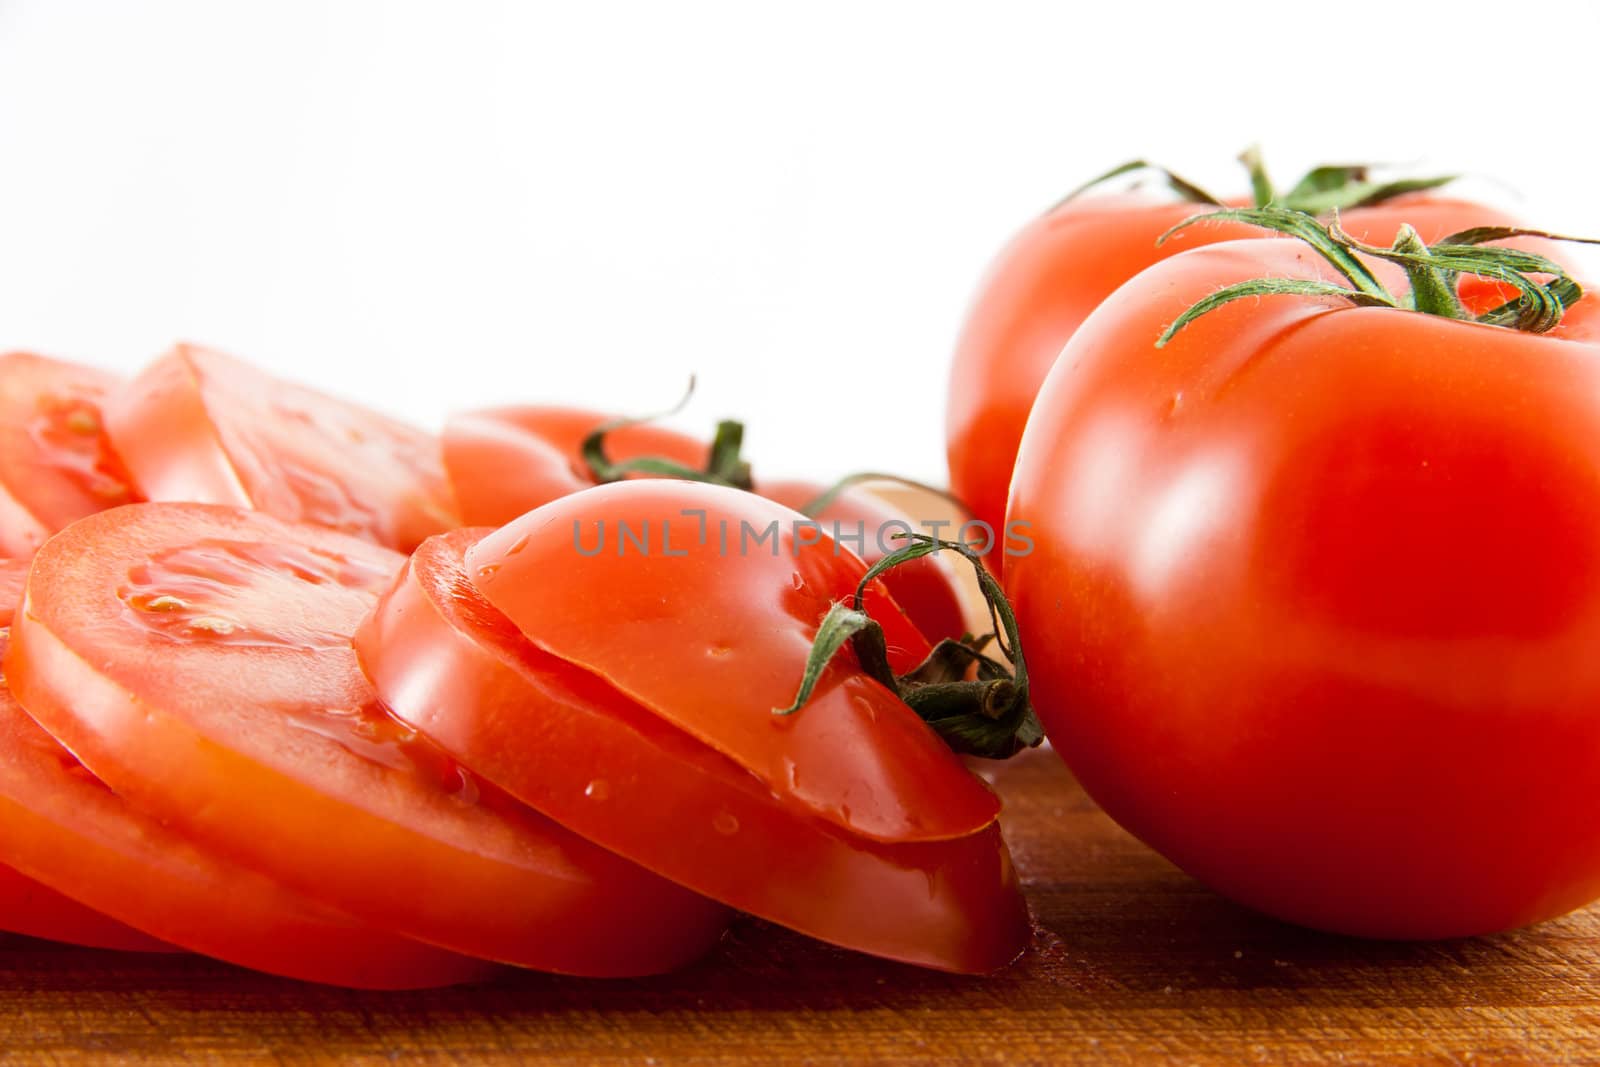 Picture of some sliced tomatoes, and two whole tomatoes